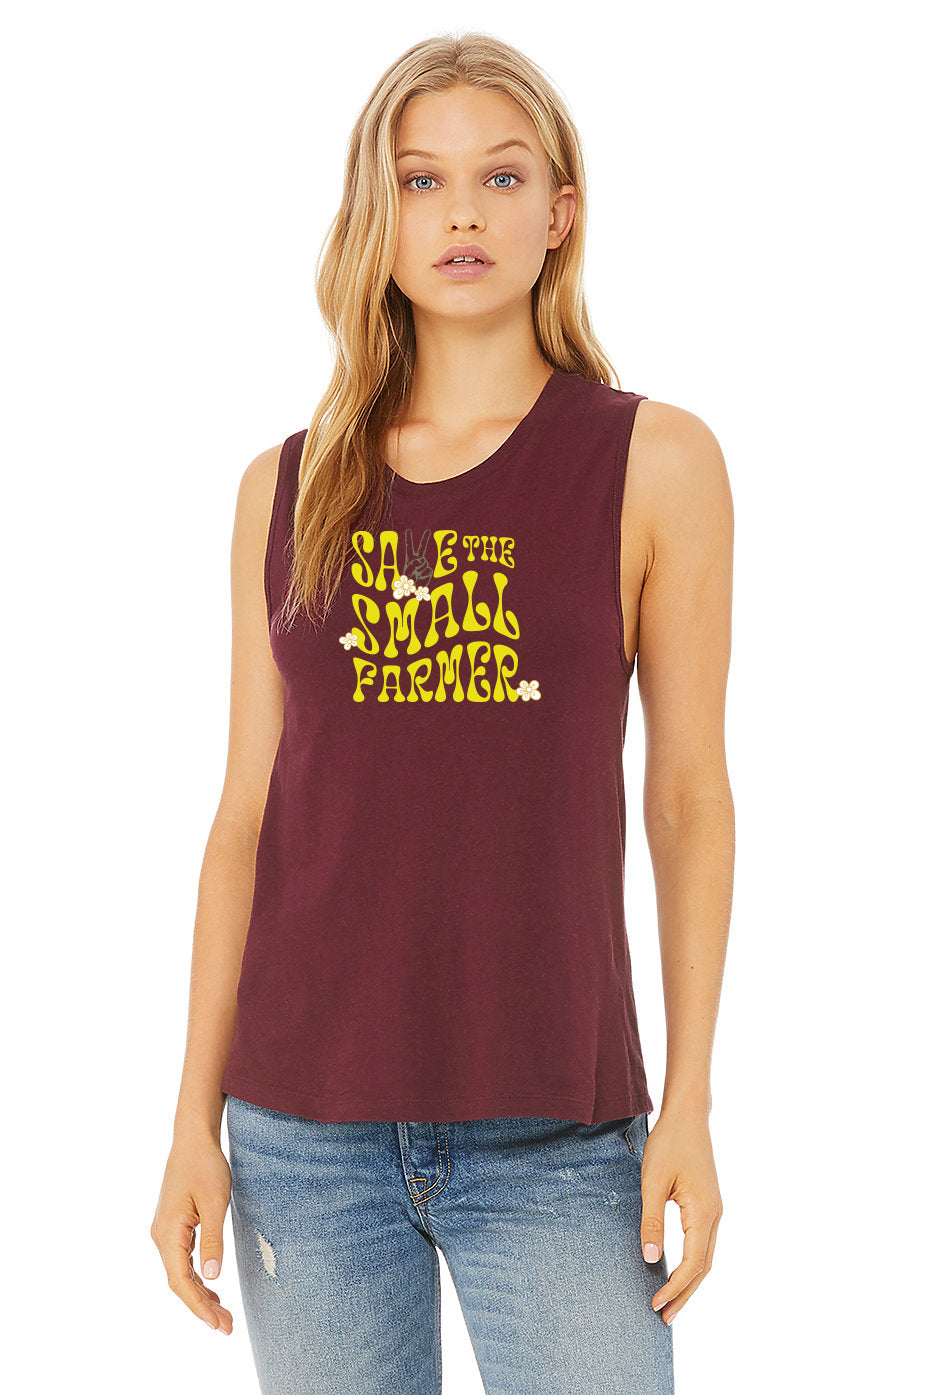 WWF "Save the small farmer" | Women's Muscle Tank